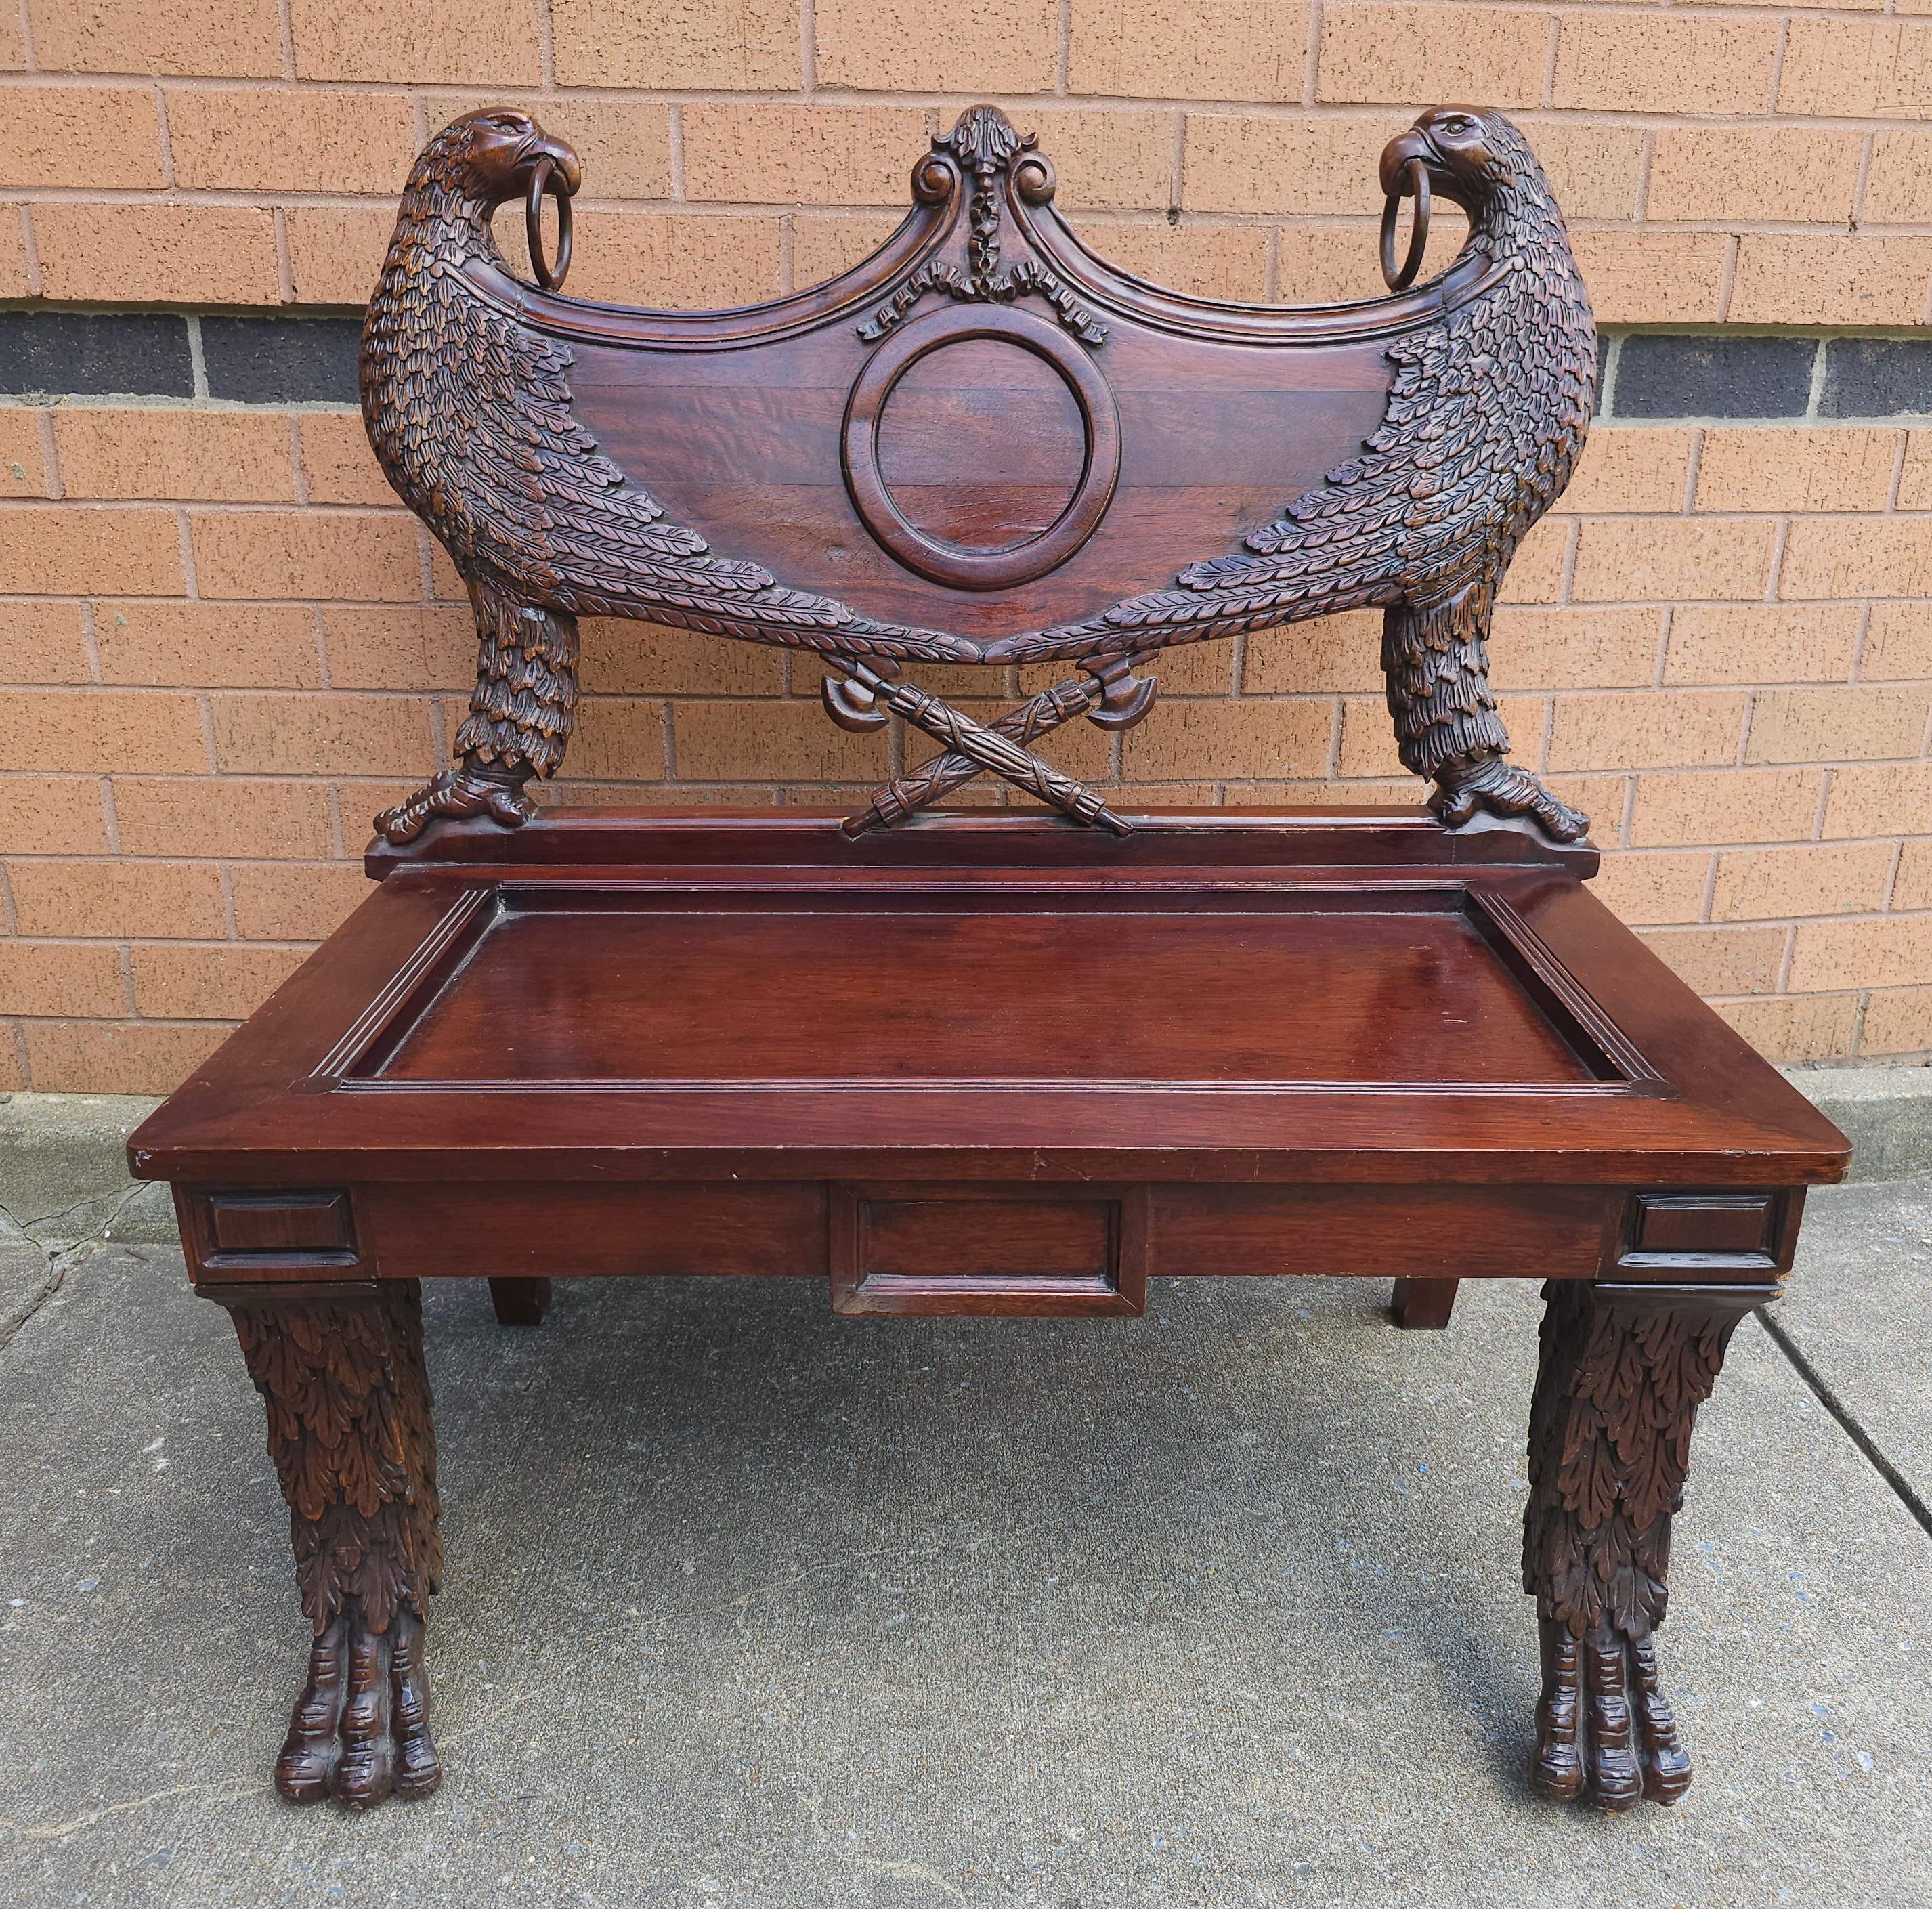 An early 20th Century Empire Style Heraldic coat of arms Intricately Carved Mahogany Double Eagle Bench with loose seat cushion. Measures 36.5